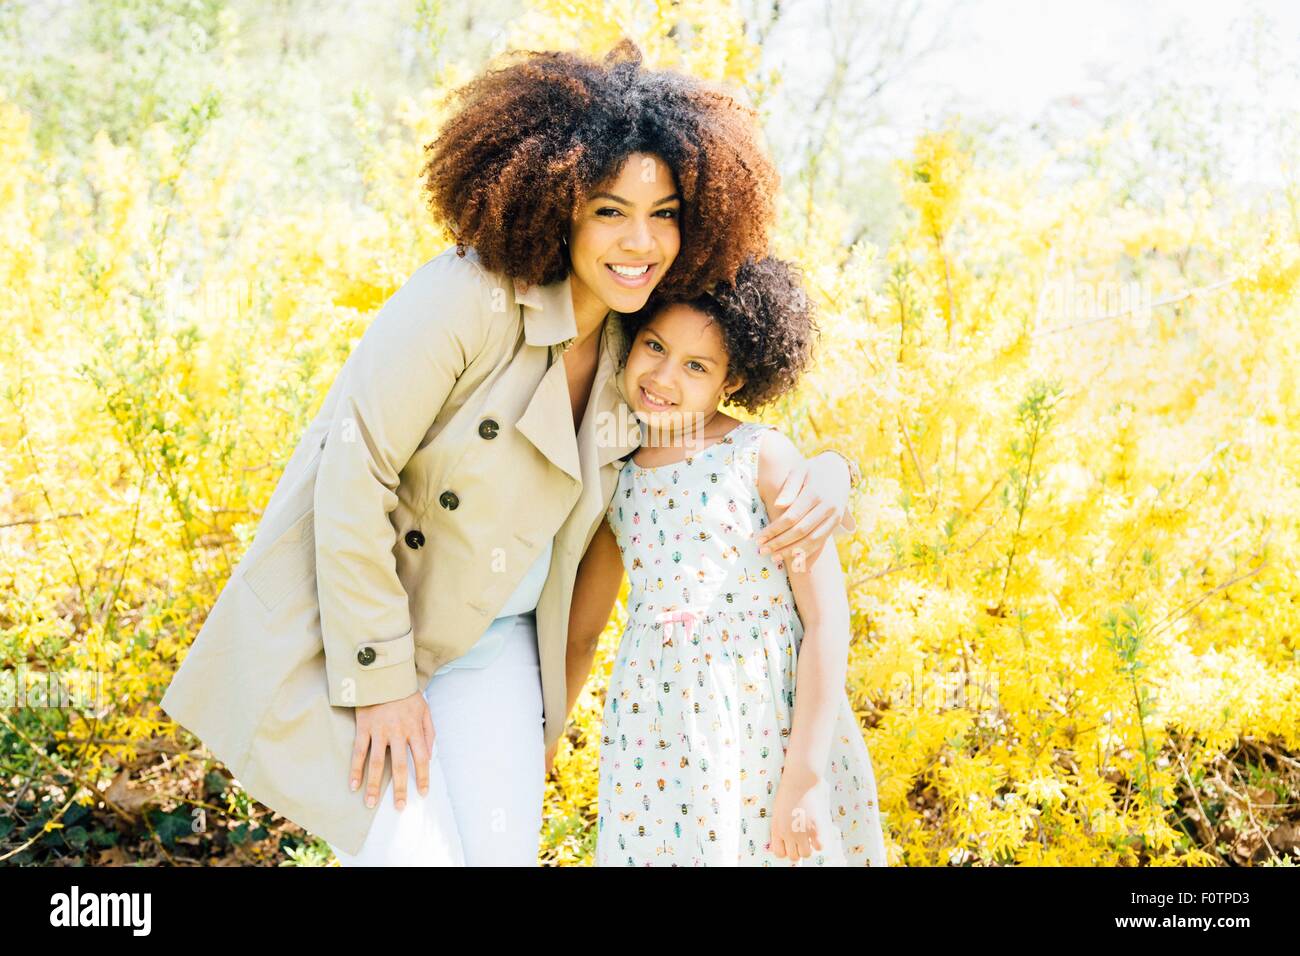 Portrait of mother with arm around daughter, looking at camera, smiling Stock Photo